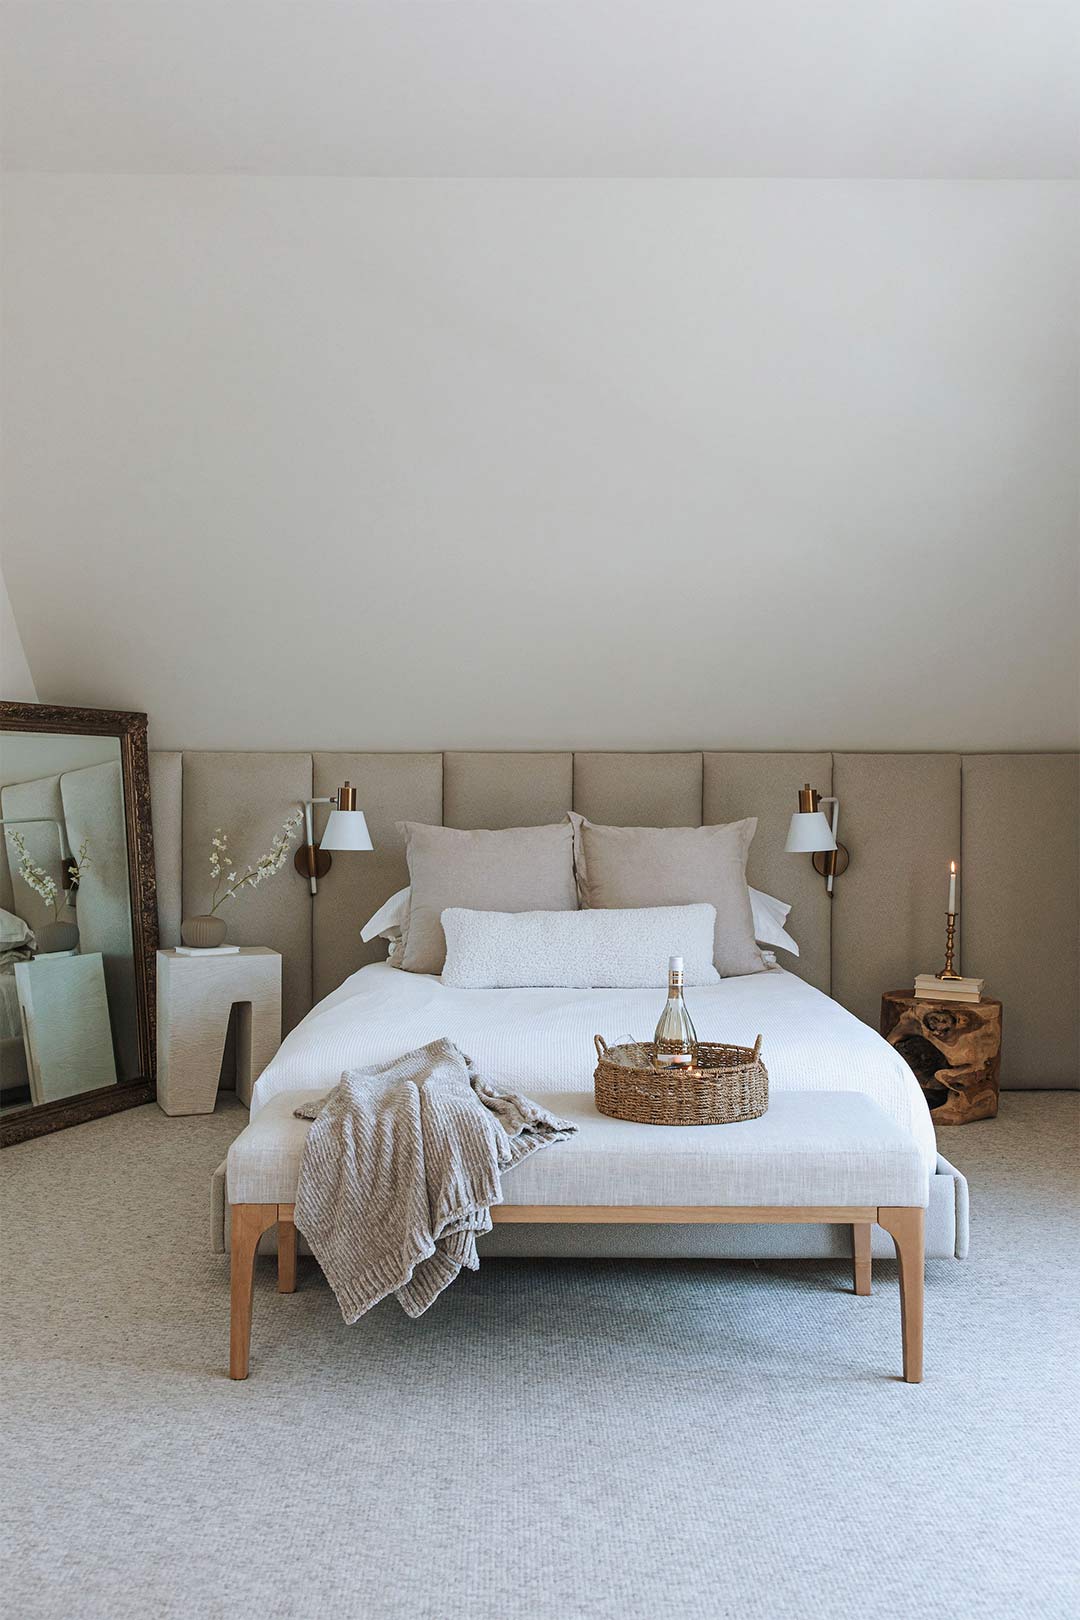 Full-wall upholstered heardboard in a neutral toned bedroom with modern brass scones, and organic-modern furniture.